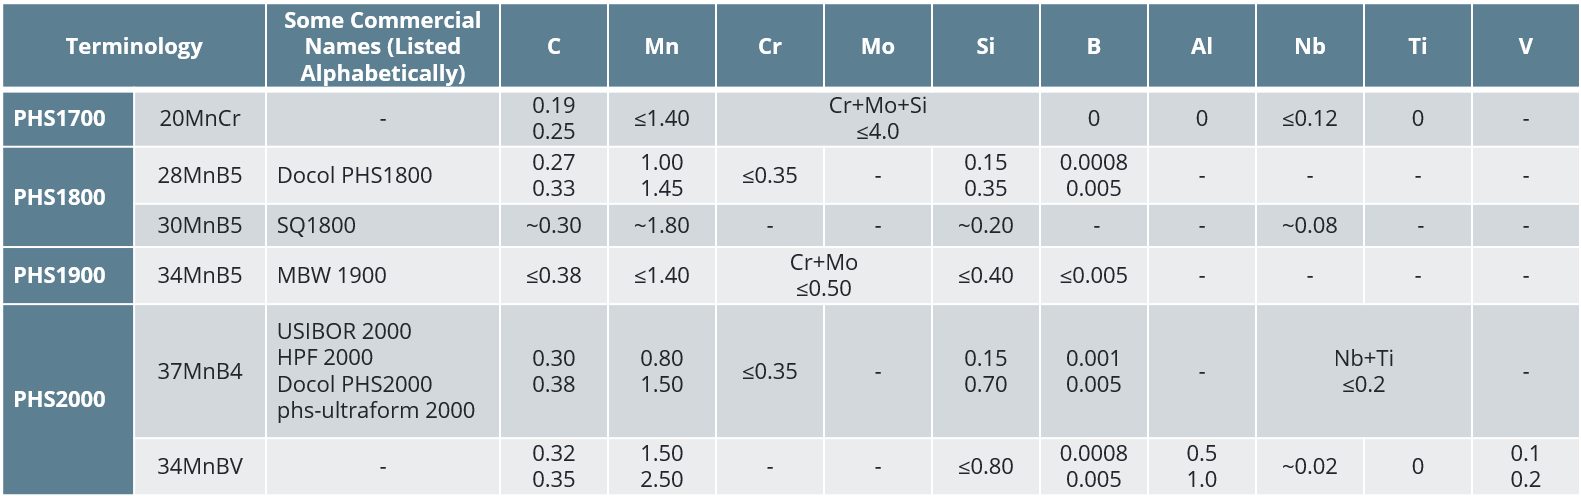 Table 4: Chemical compositions of higher strength PHS grades. “0” means it is known that there is no alloying element, while “-” means there is no information. “~” is used for typical values; otherwise, minimum or maximum are given. The terminology descriptions are not standardized. PQS names are based on their properties and grade names are derived from a possible chemistry or OEM description. The properties listed here encompass those presented in multiple sources and may or may not be associated with any one specific commercial grade.W-28, B-32, H-33, G-33, L-28, S-67, S-66, Y-12, B-33